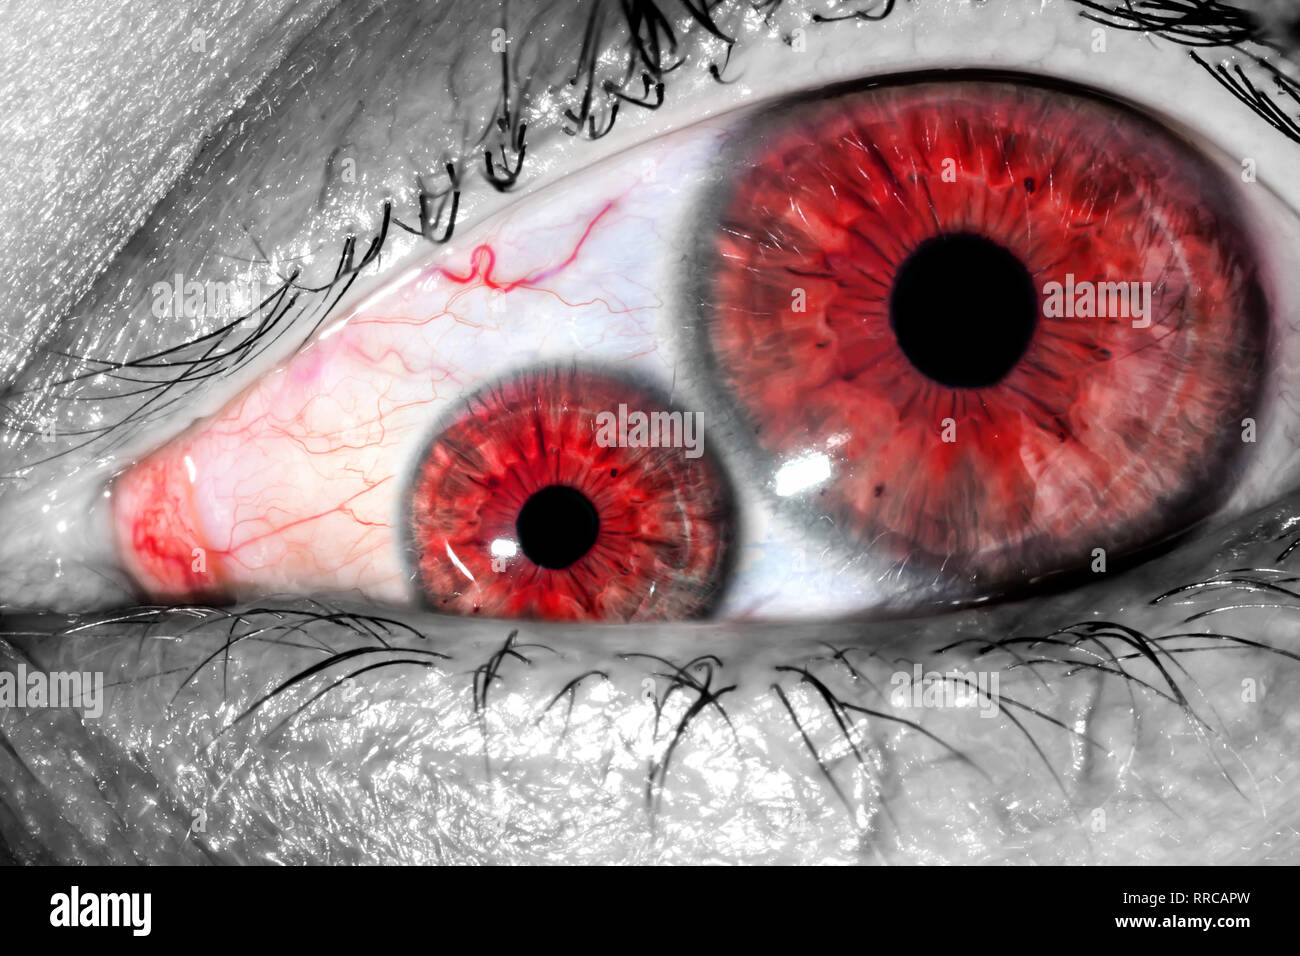 Human Eye With Two Pupils And Red Tight Veins On Protein Macro